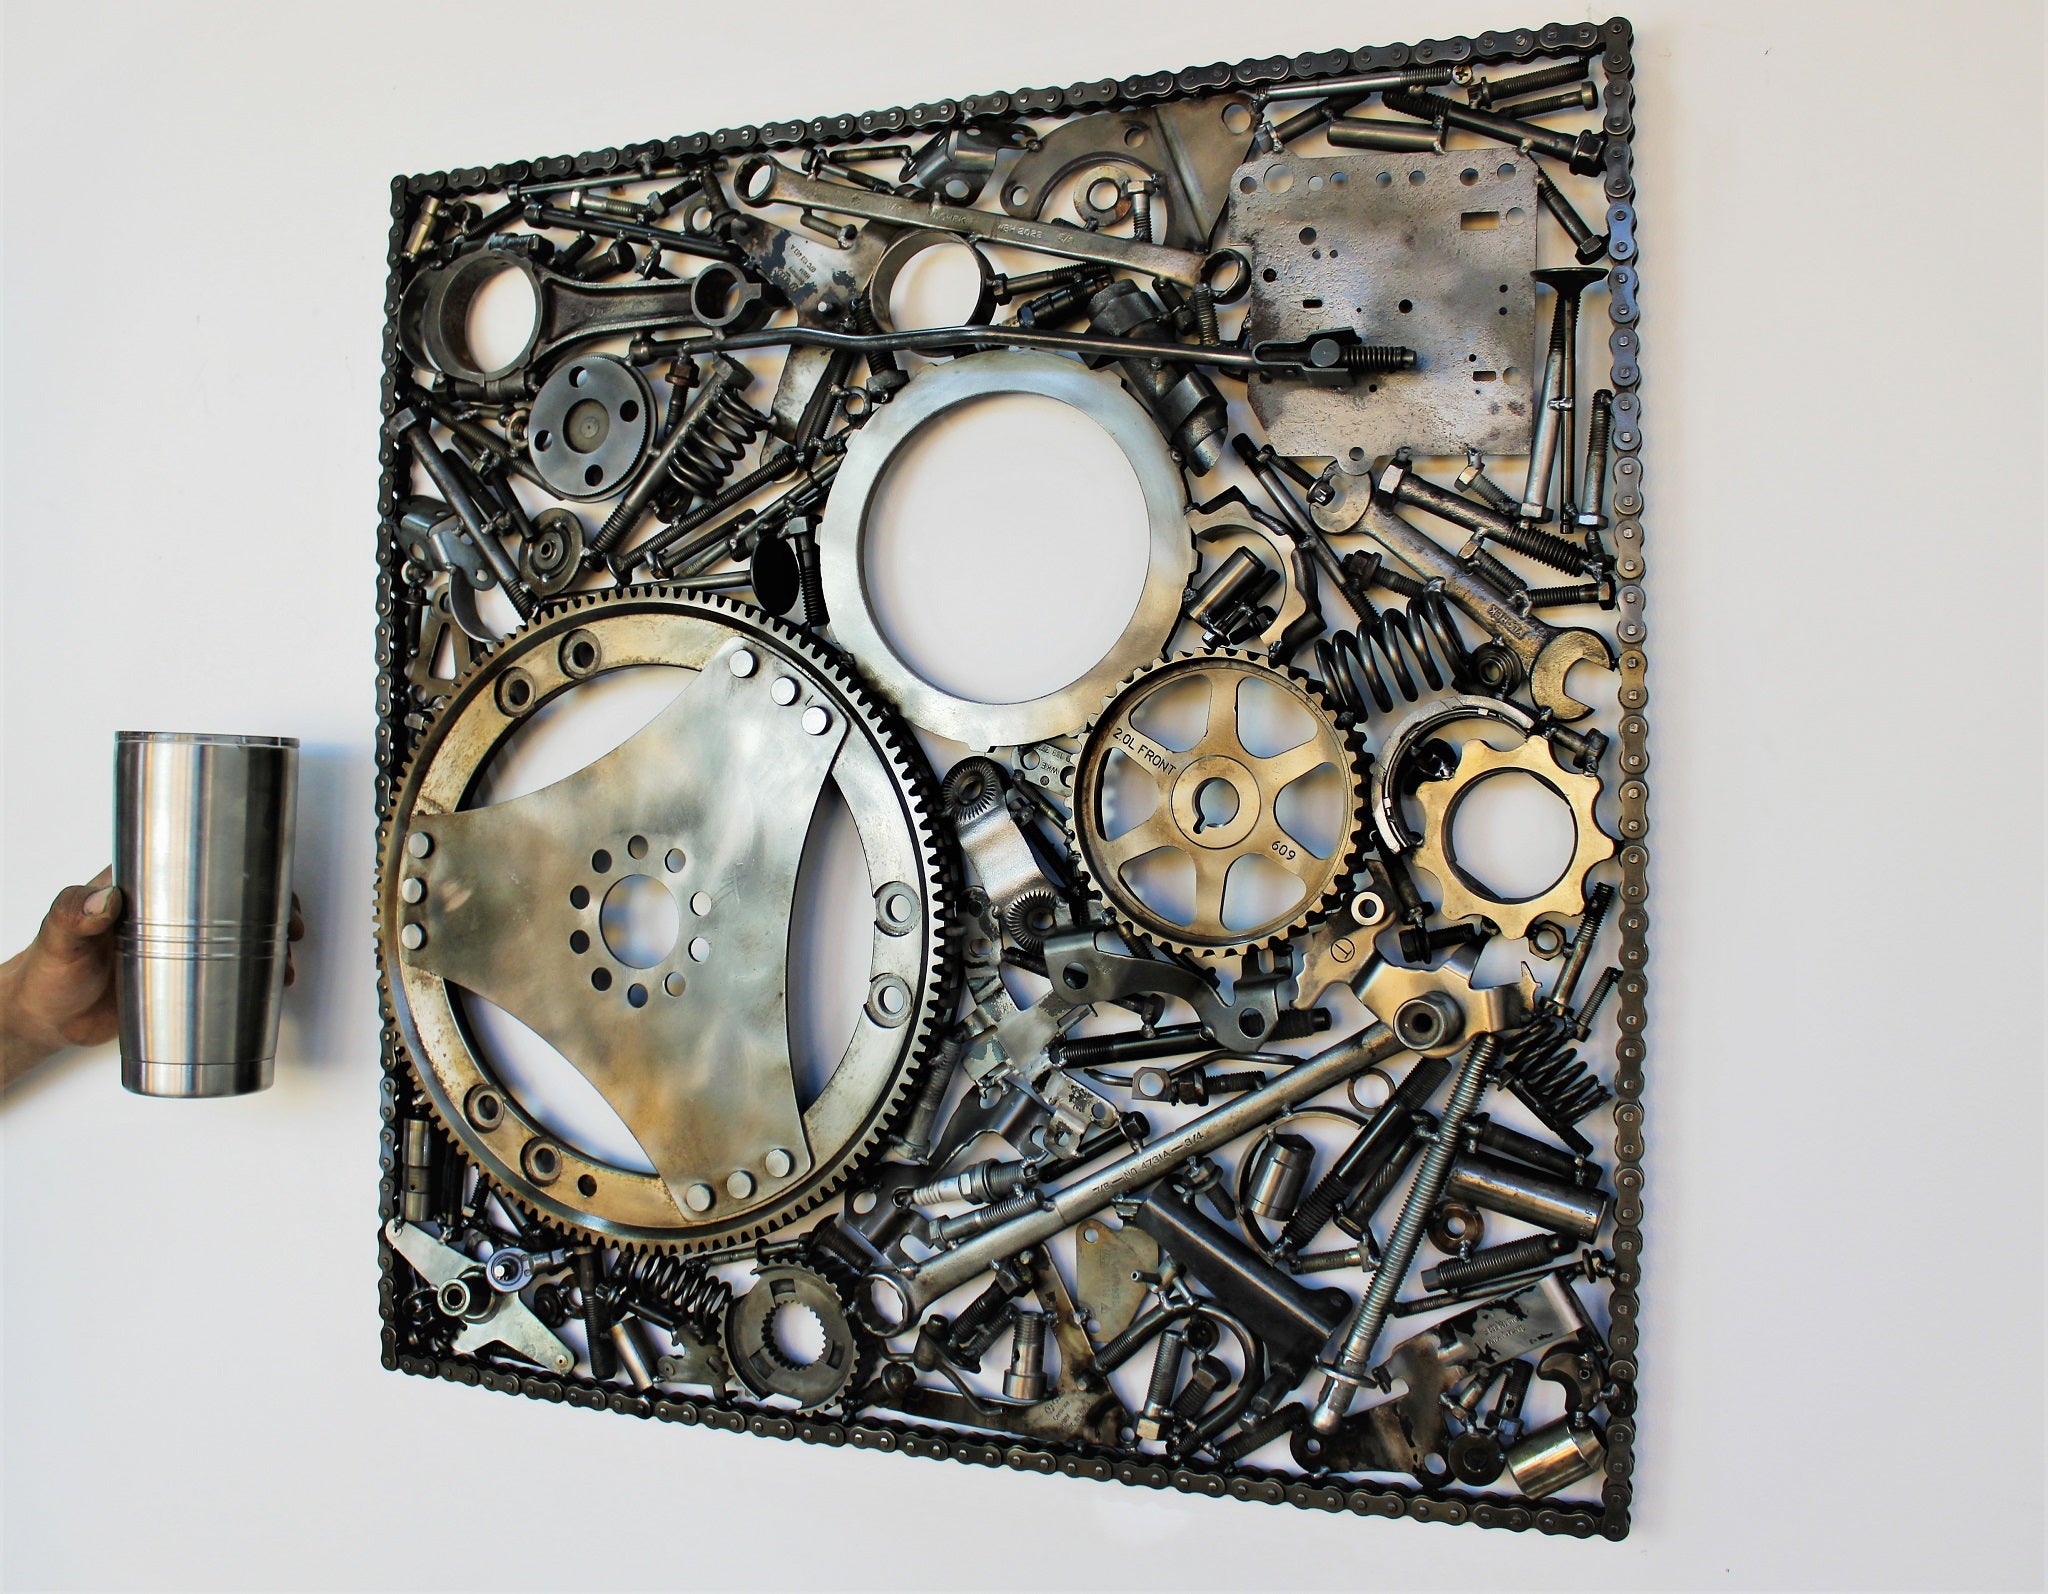 Automotive wall art made out of real car parts, 24 by 24 inch square wall hanging, next to a metal thermos for scale